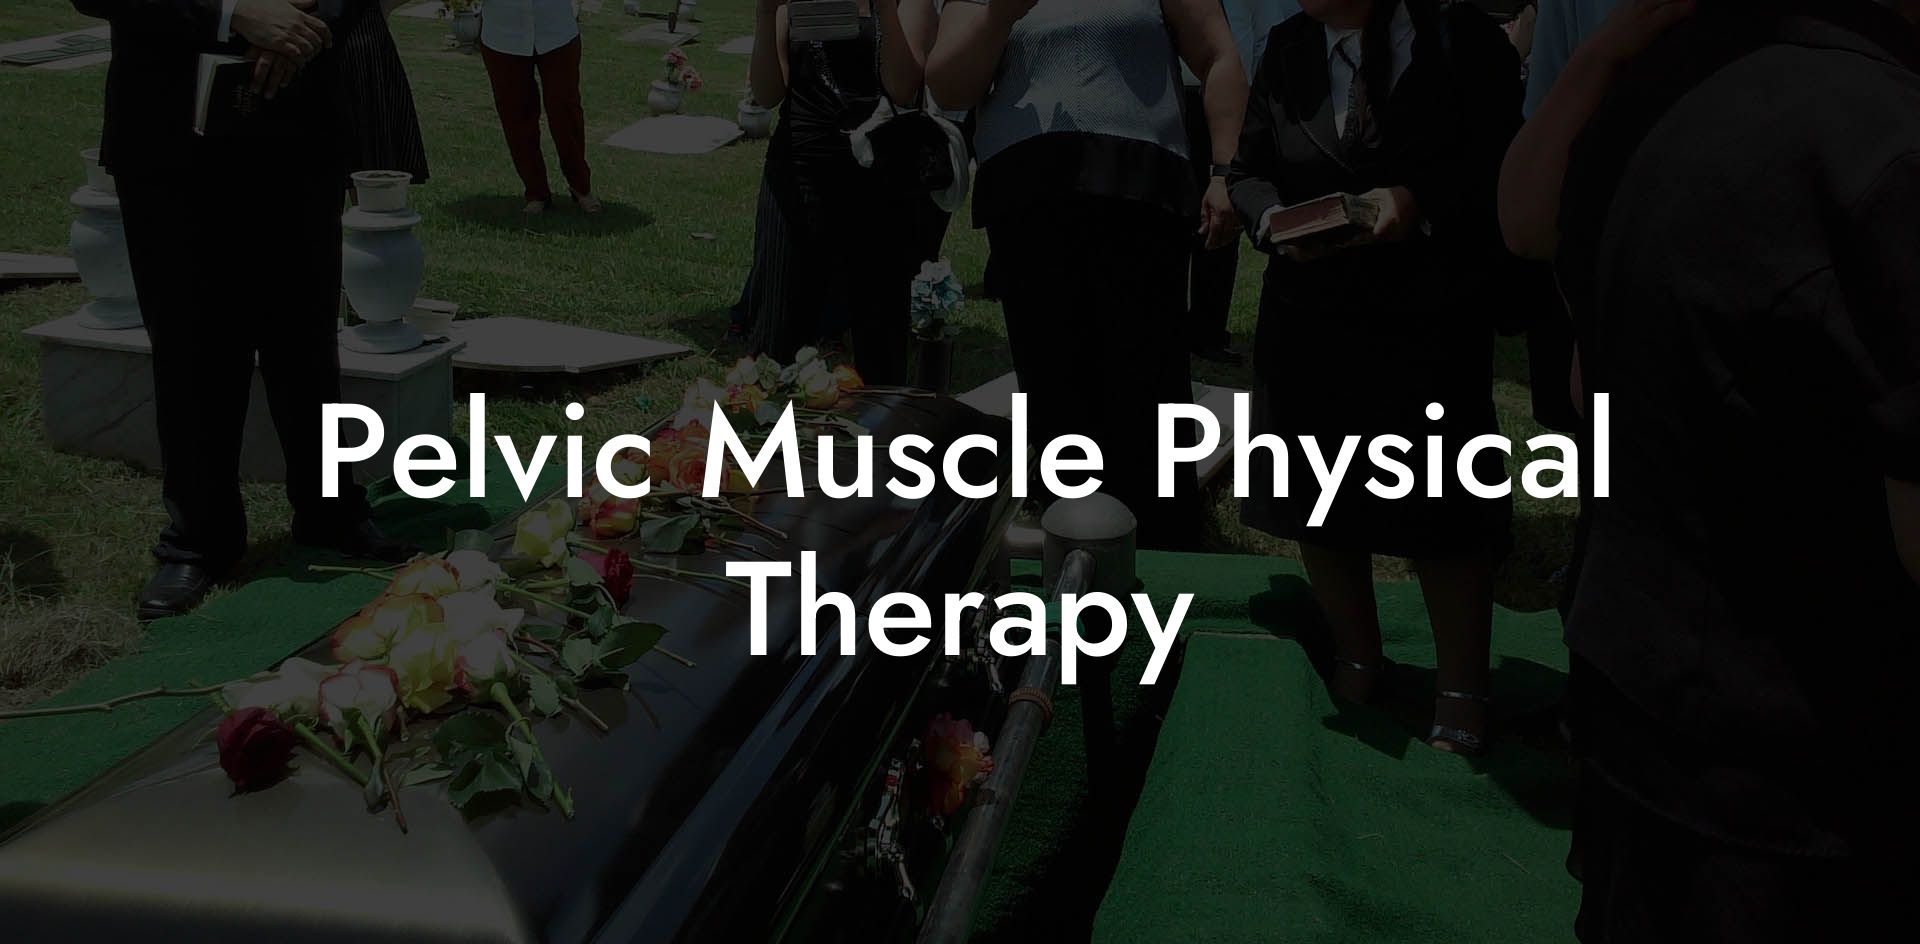 Pelvic Muscle Physical Therapy